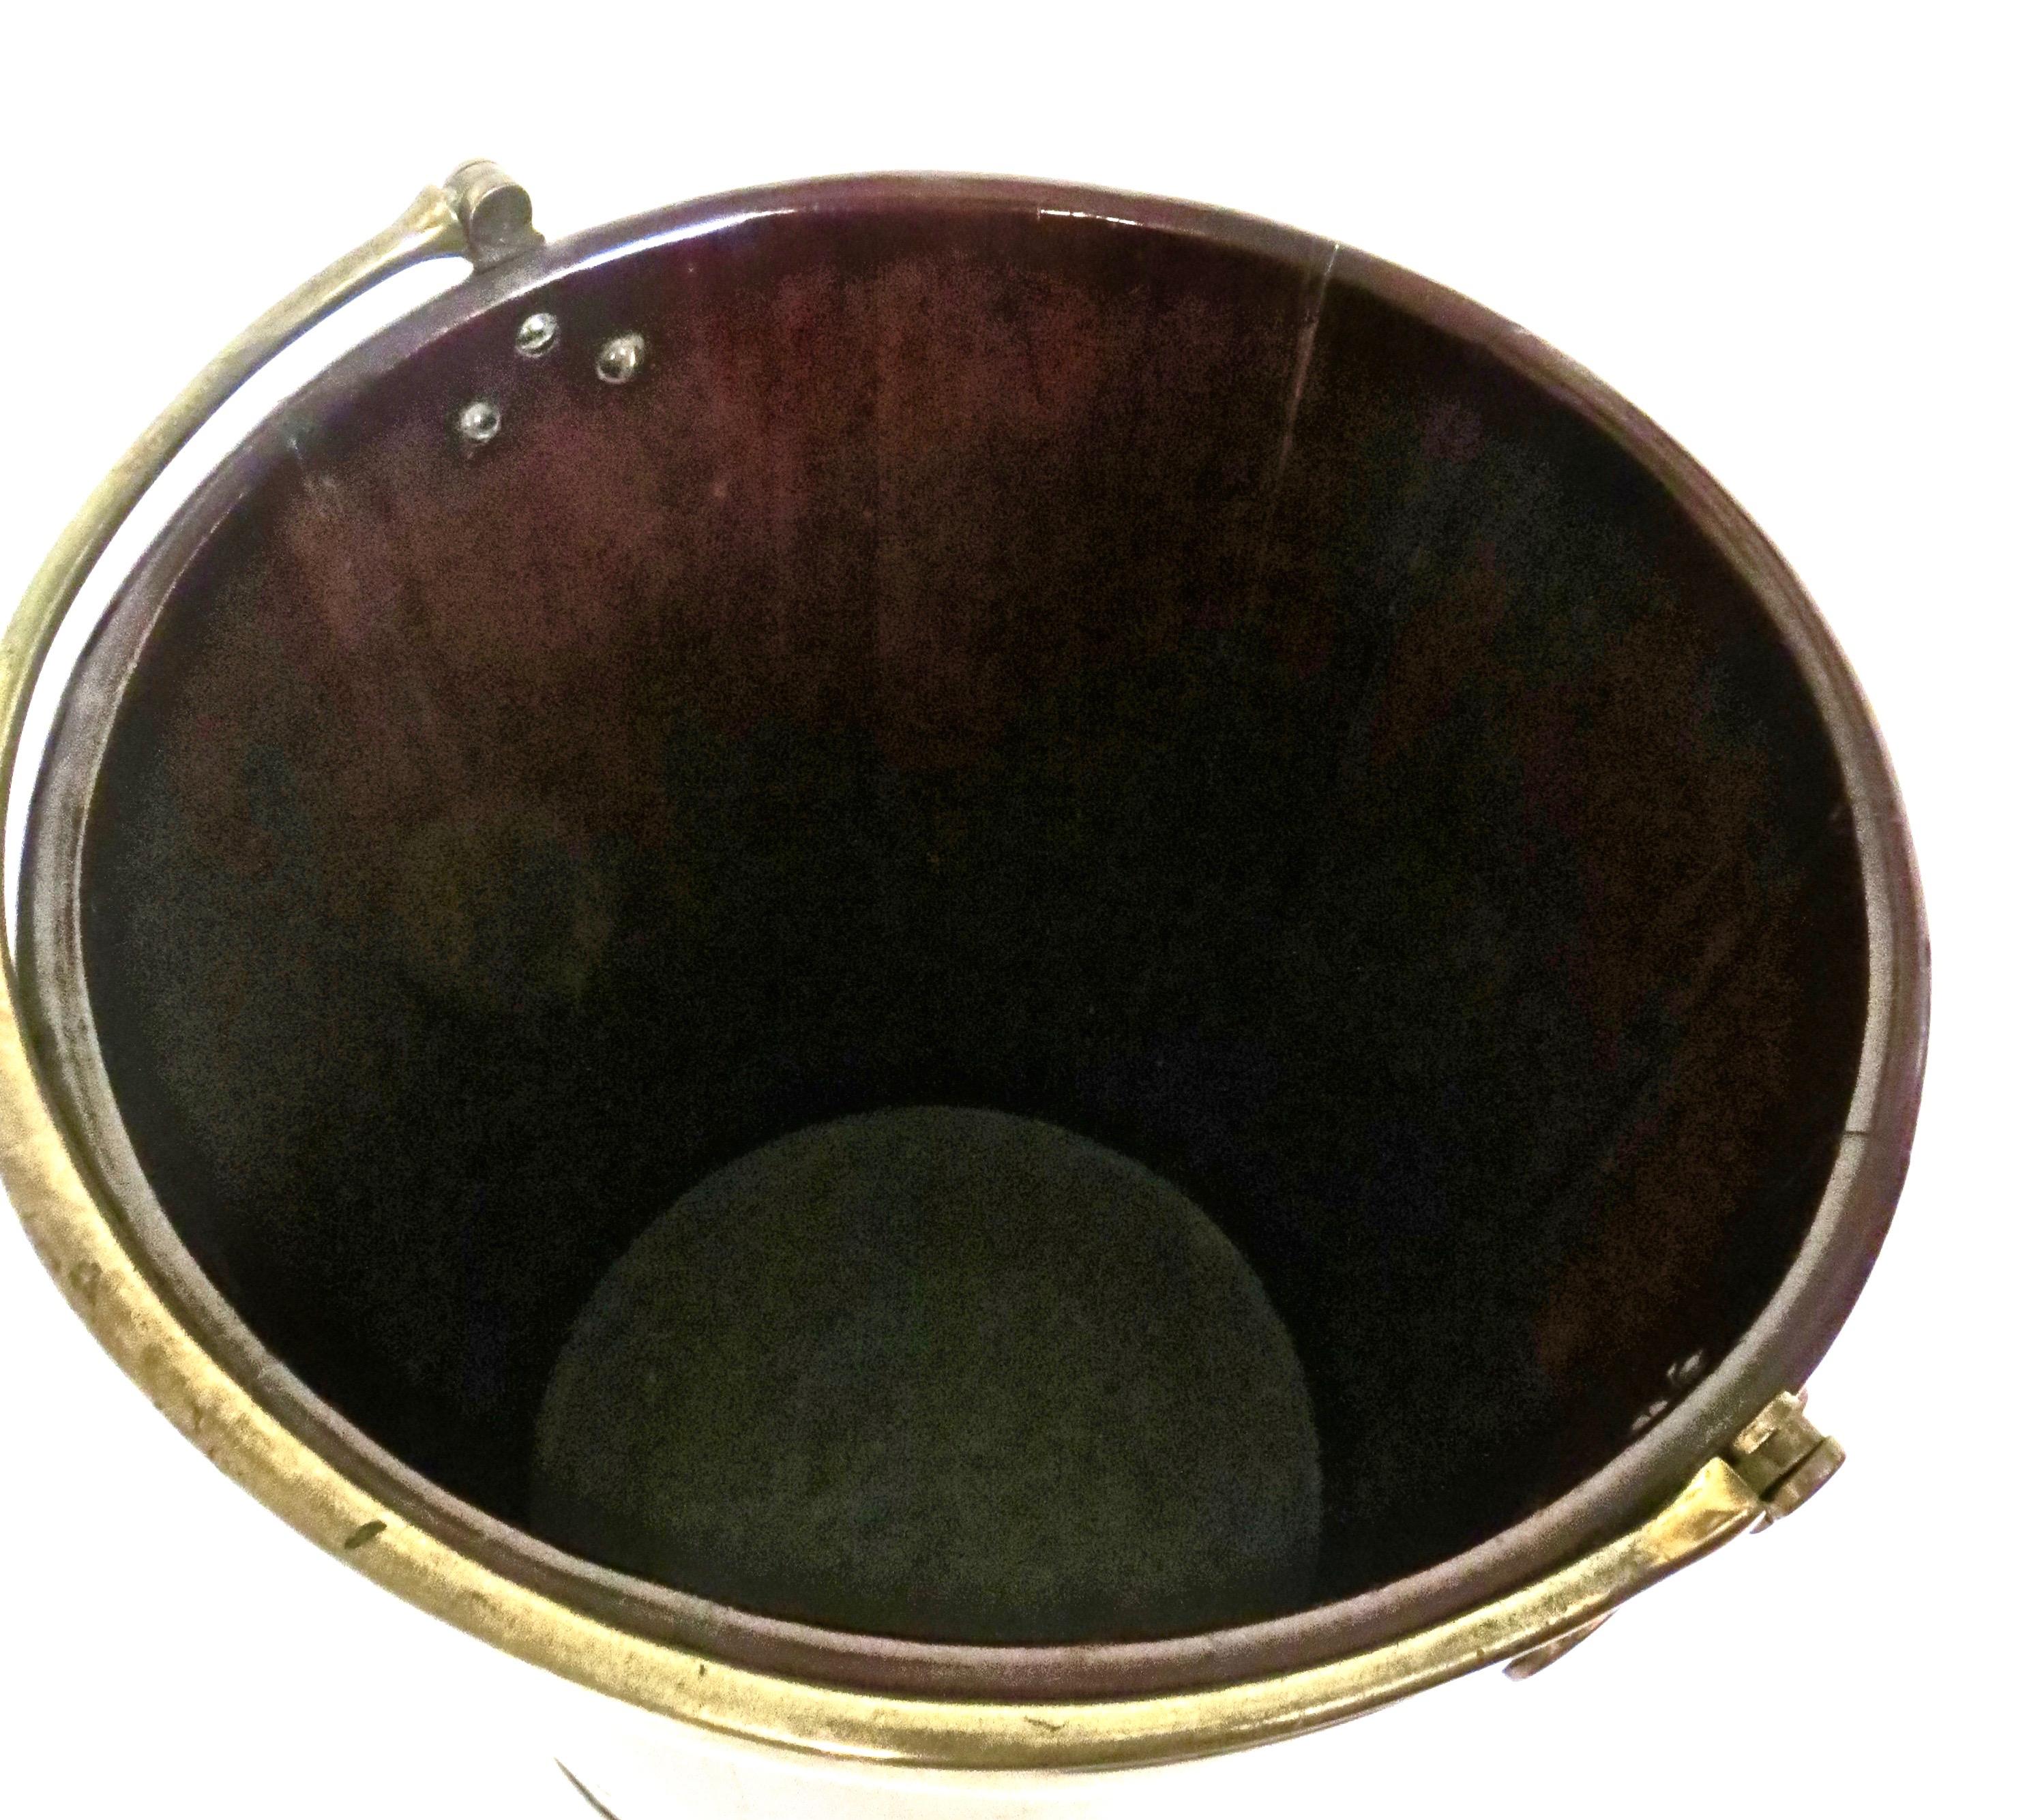 Pair of George III Mahogany Brass-Bound Buckets; 1 Peat and 1 Plate, English 9